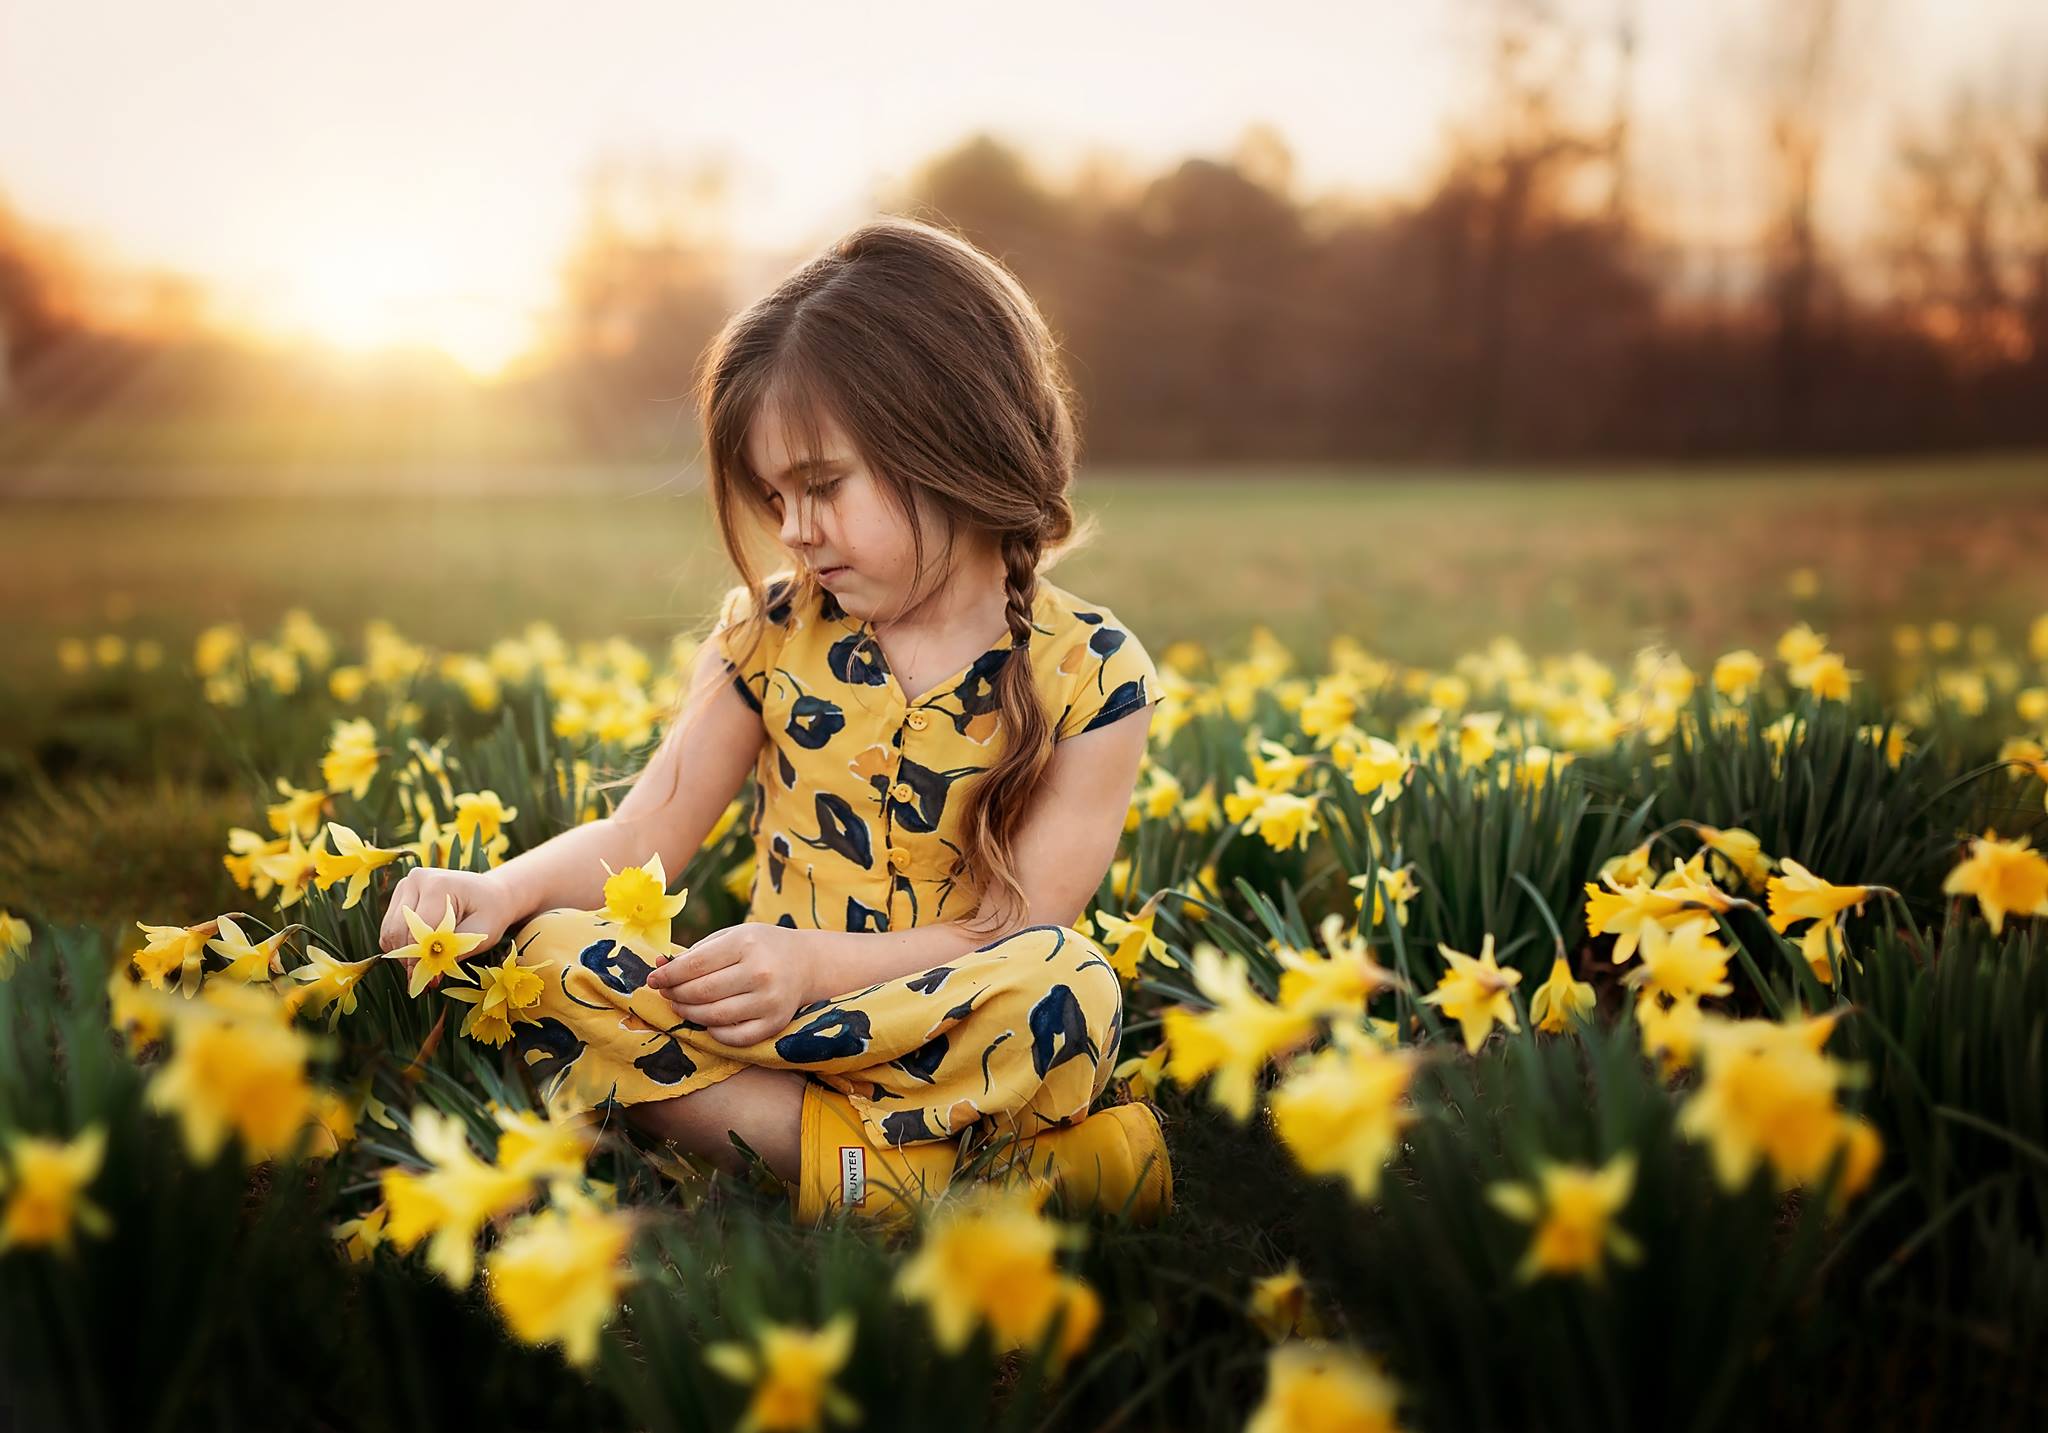 spring pictures of kids, little girl sitting in daffodils, golden hour sun